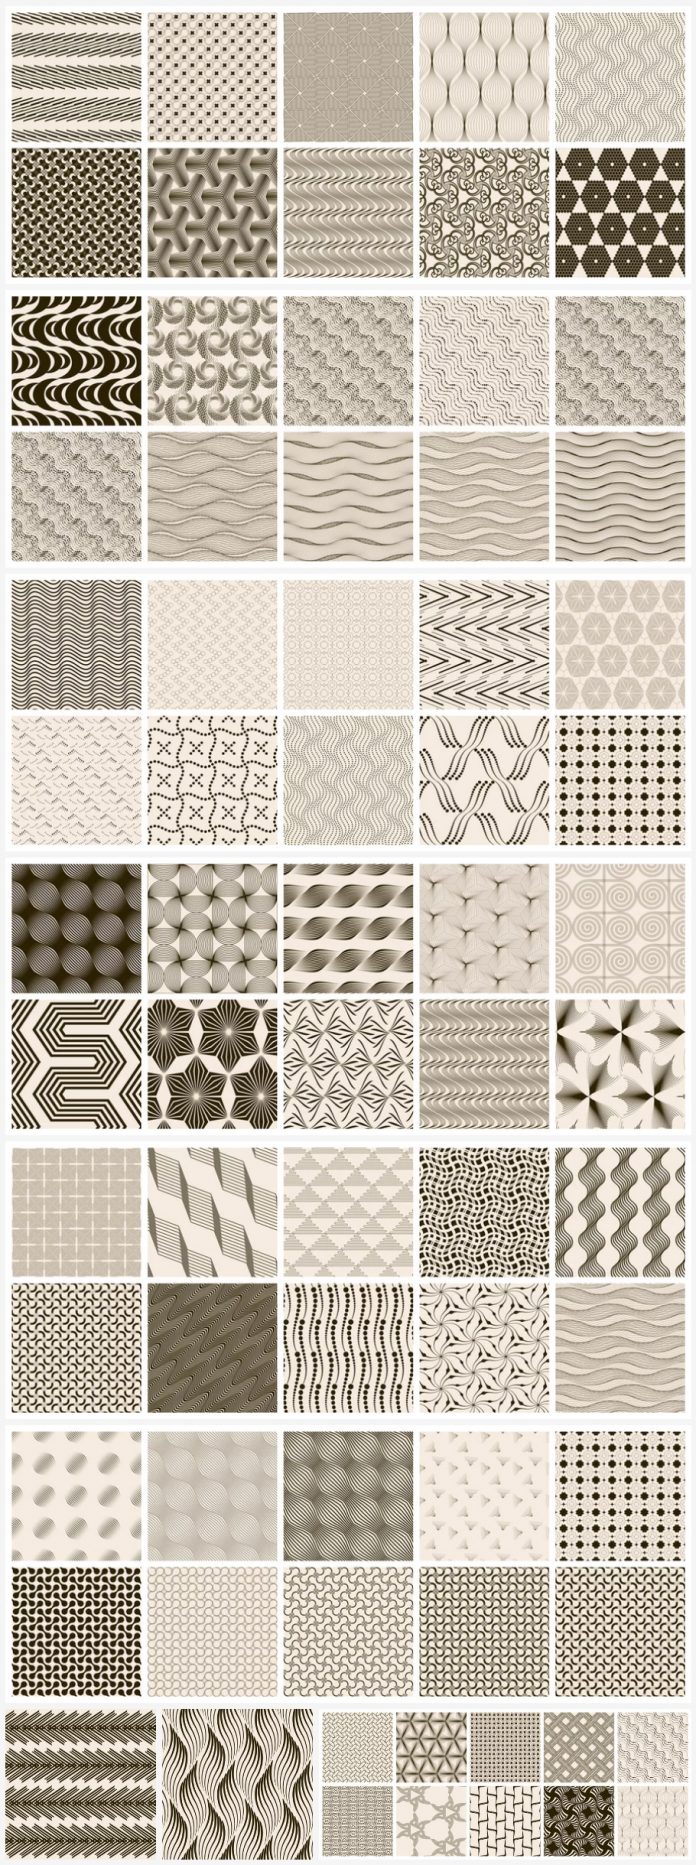 Download geometric patterns as fully editable vector graphics